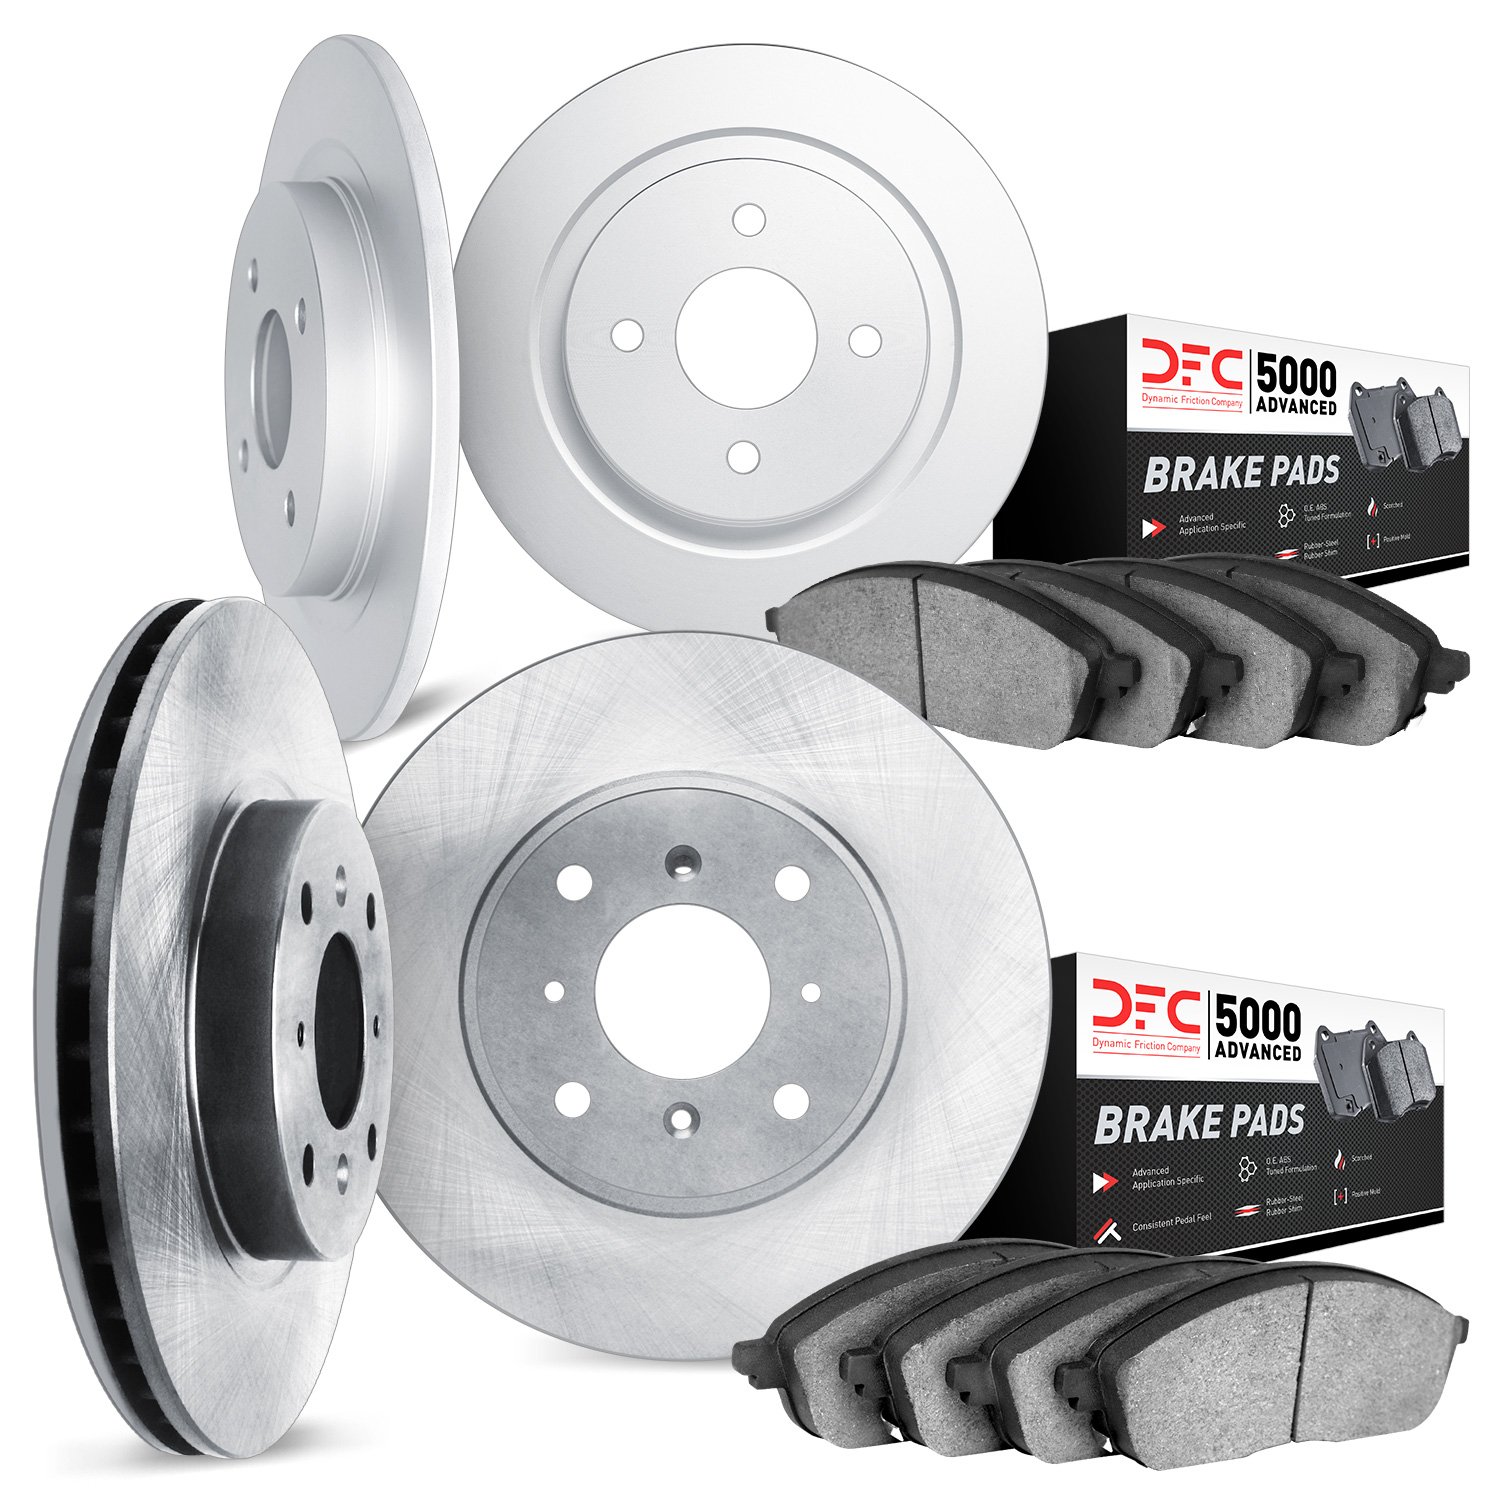 6504-76336 Brake Rotors w/5000 Advanced Brake Pads Kit, 1987-1988 Multiple Makes/Models, Position: Front and Rear